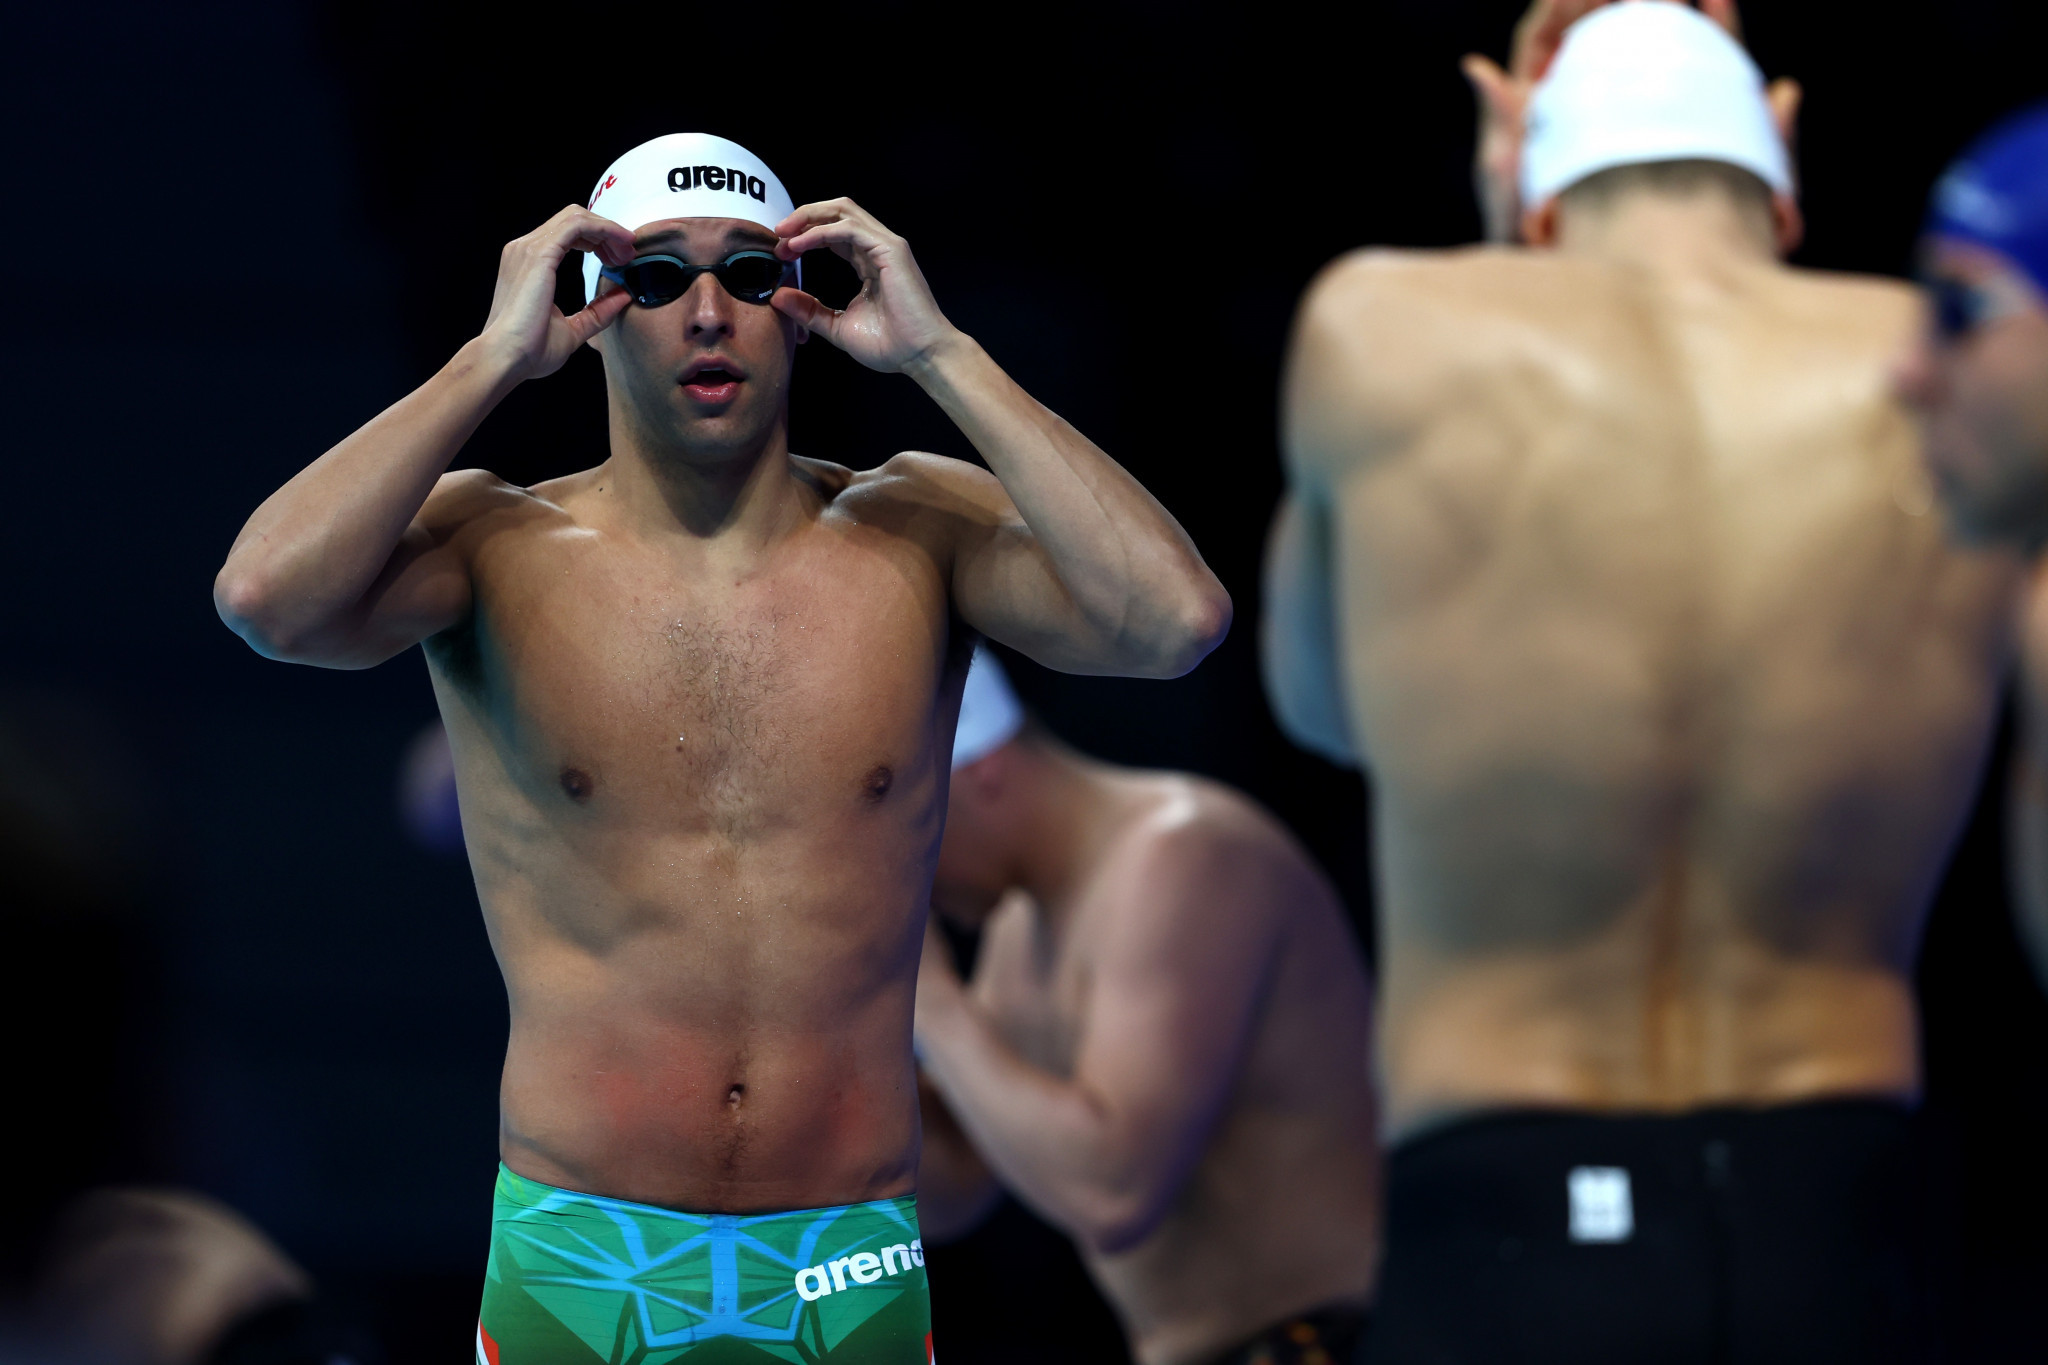 Chad Le Clos was one of just two South African swimmer competing in Abu Dhabi due to travel restrictions in his home nation ©Getty Images